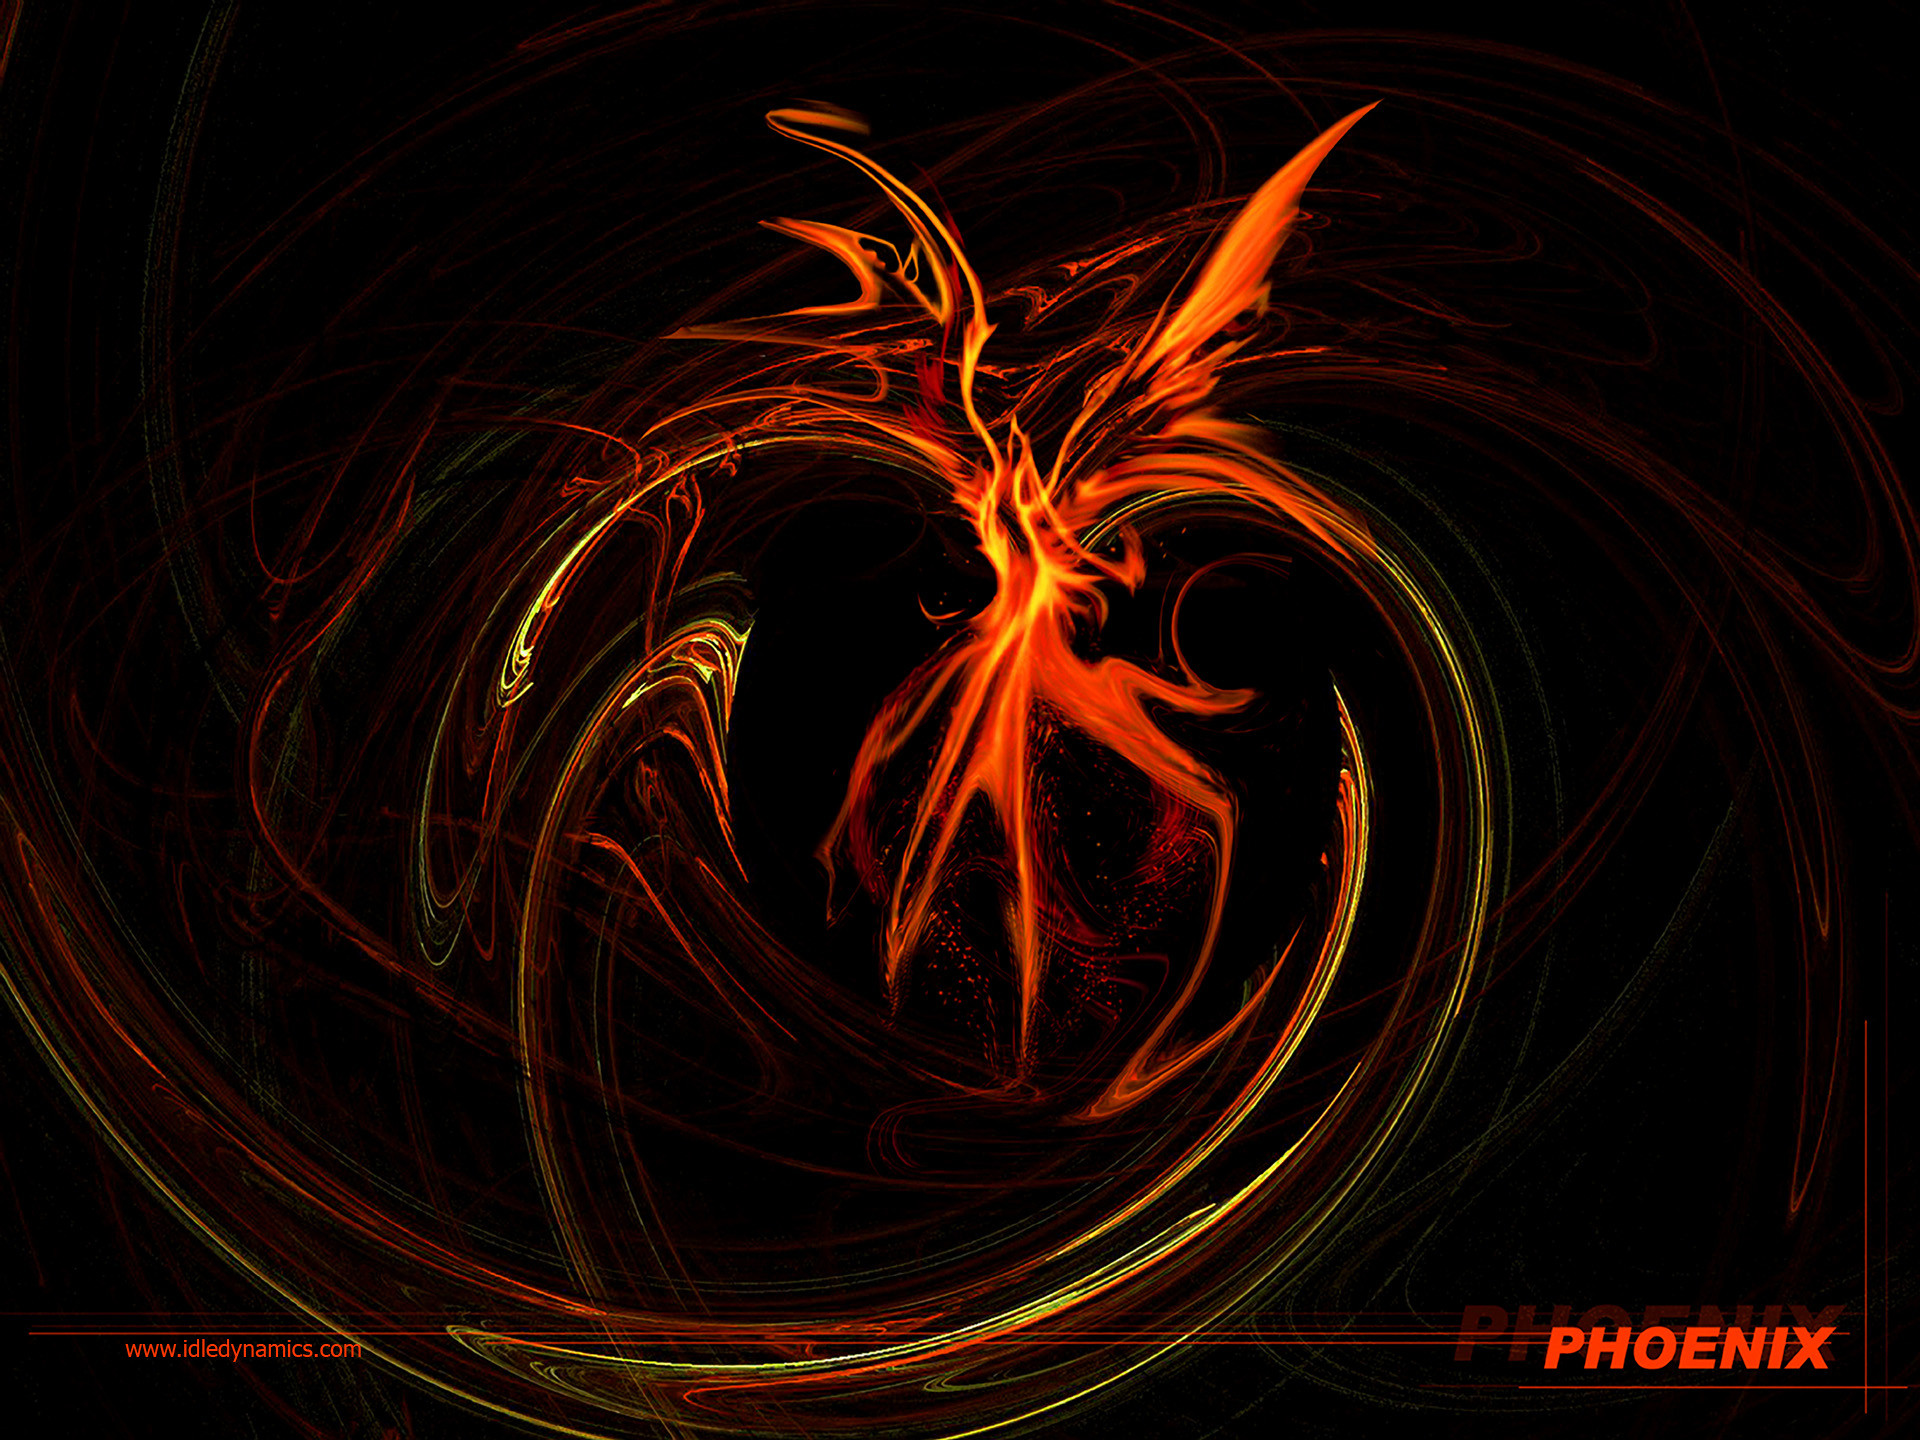 1920x1440 Phoenix wallpapers and stock photos